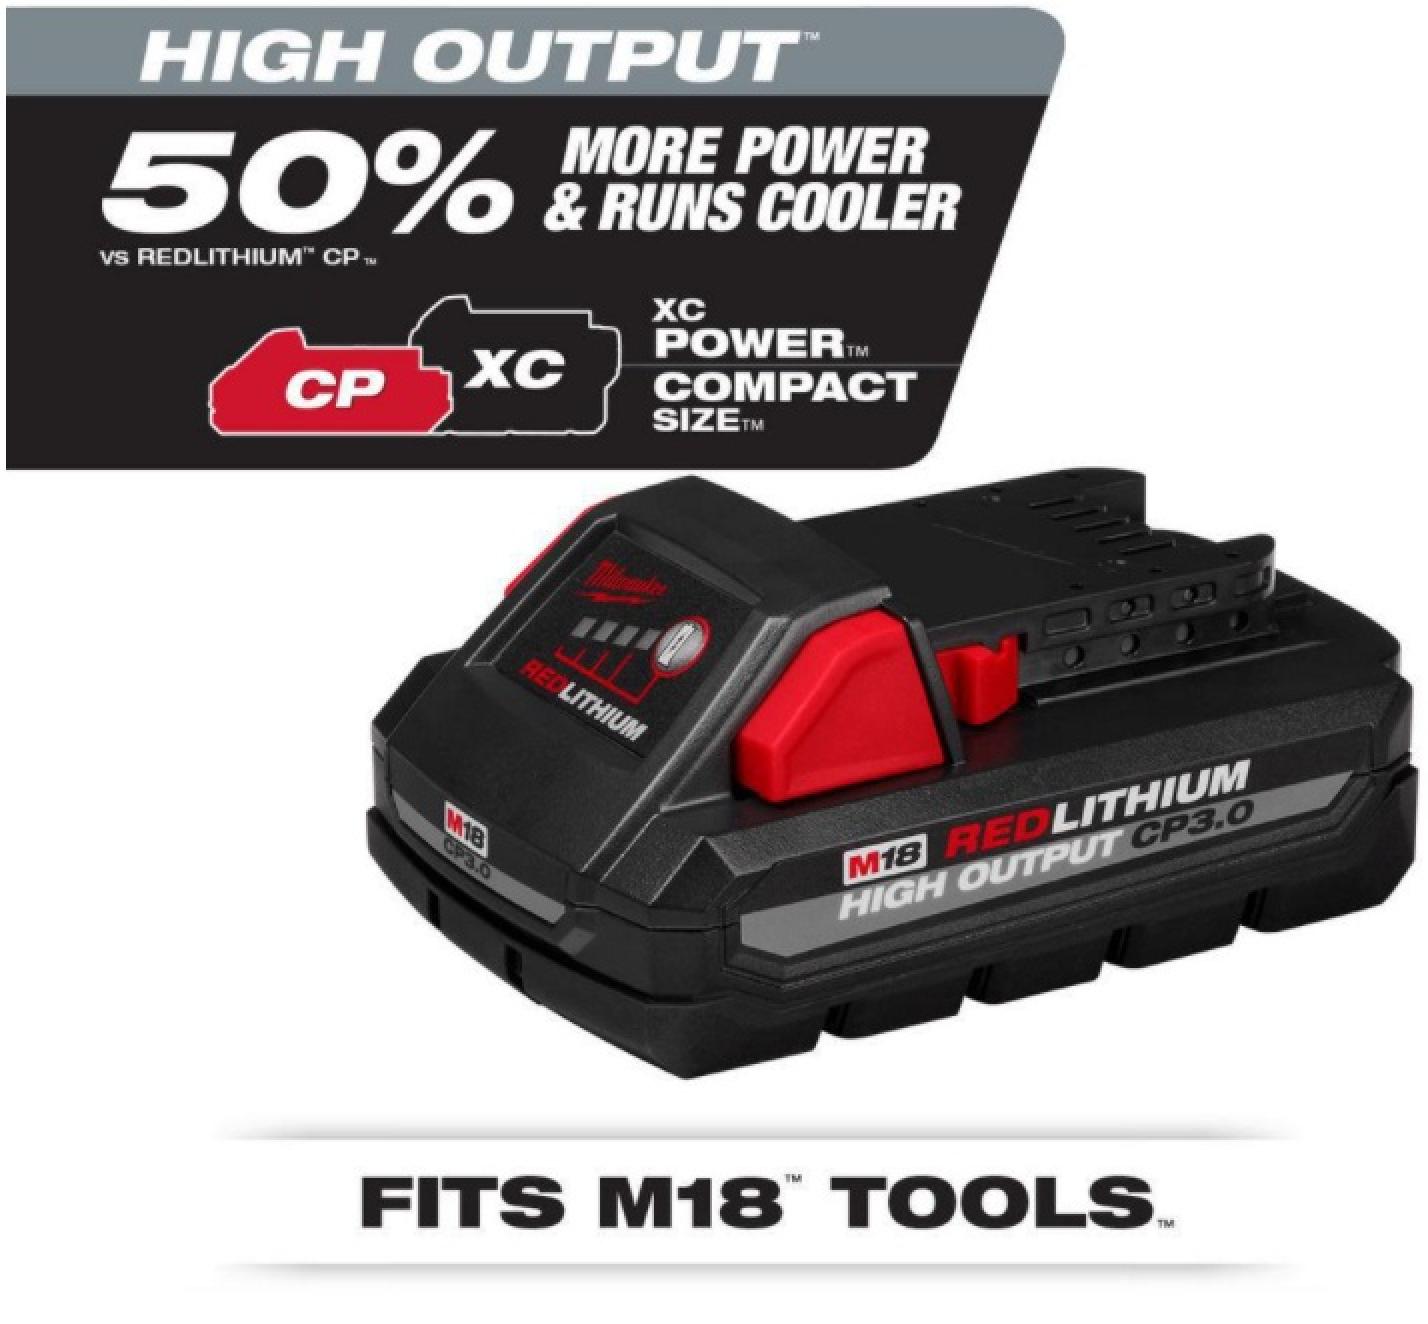 Milwaukee M18 FUEL Impact + PACKOUT Case